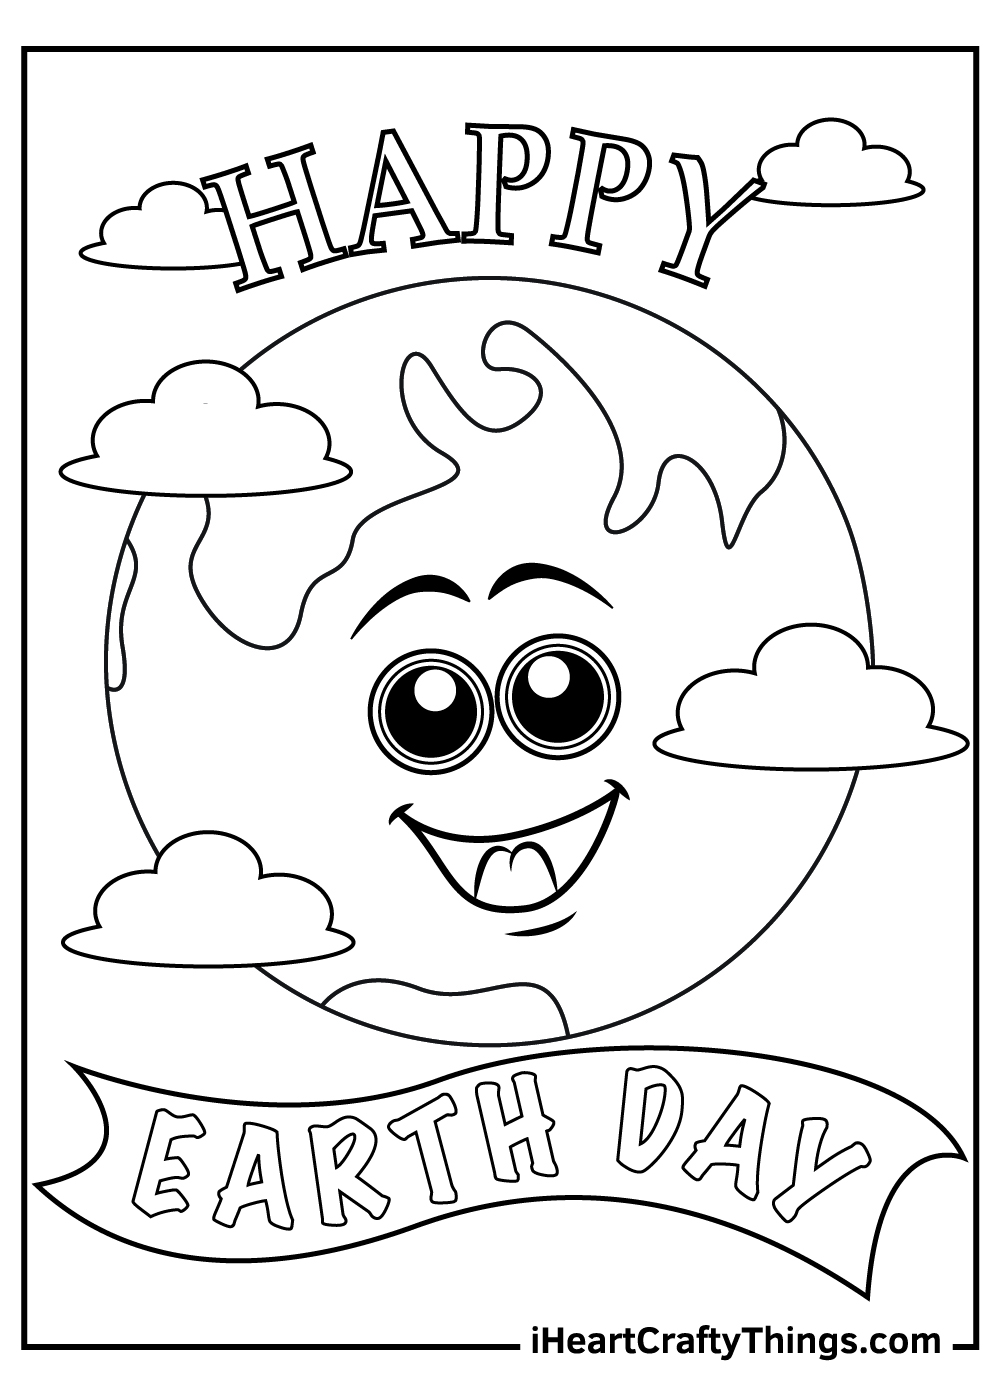 Earth day coloring pages free printables